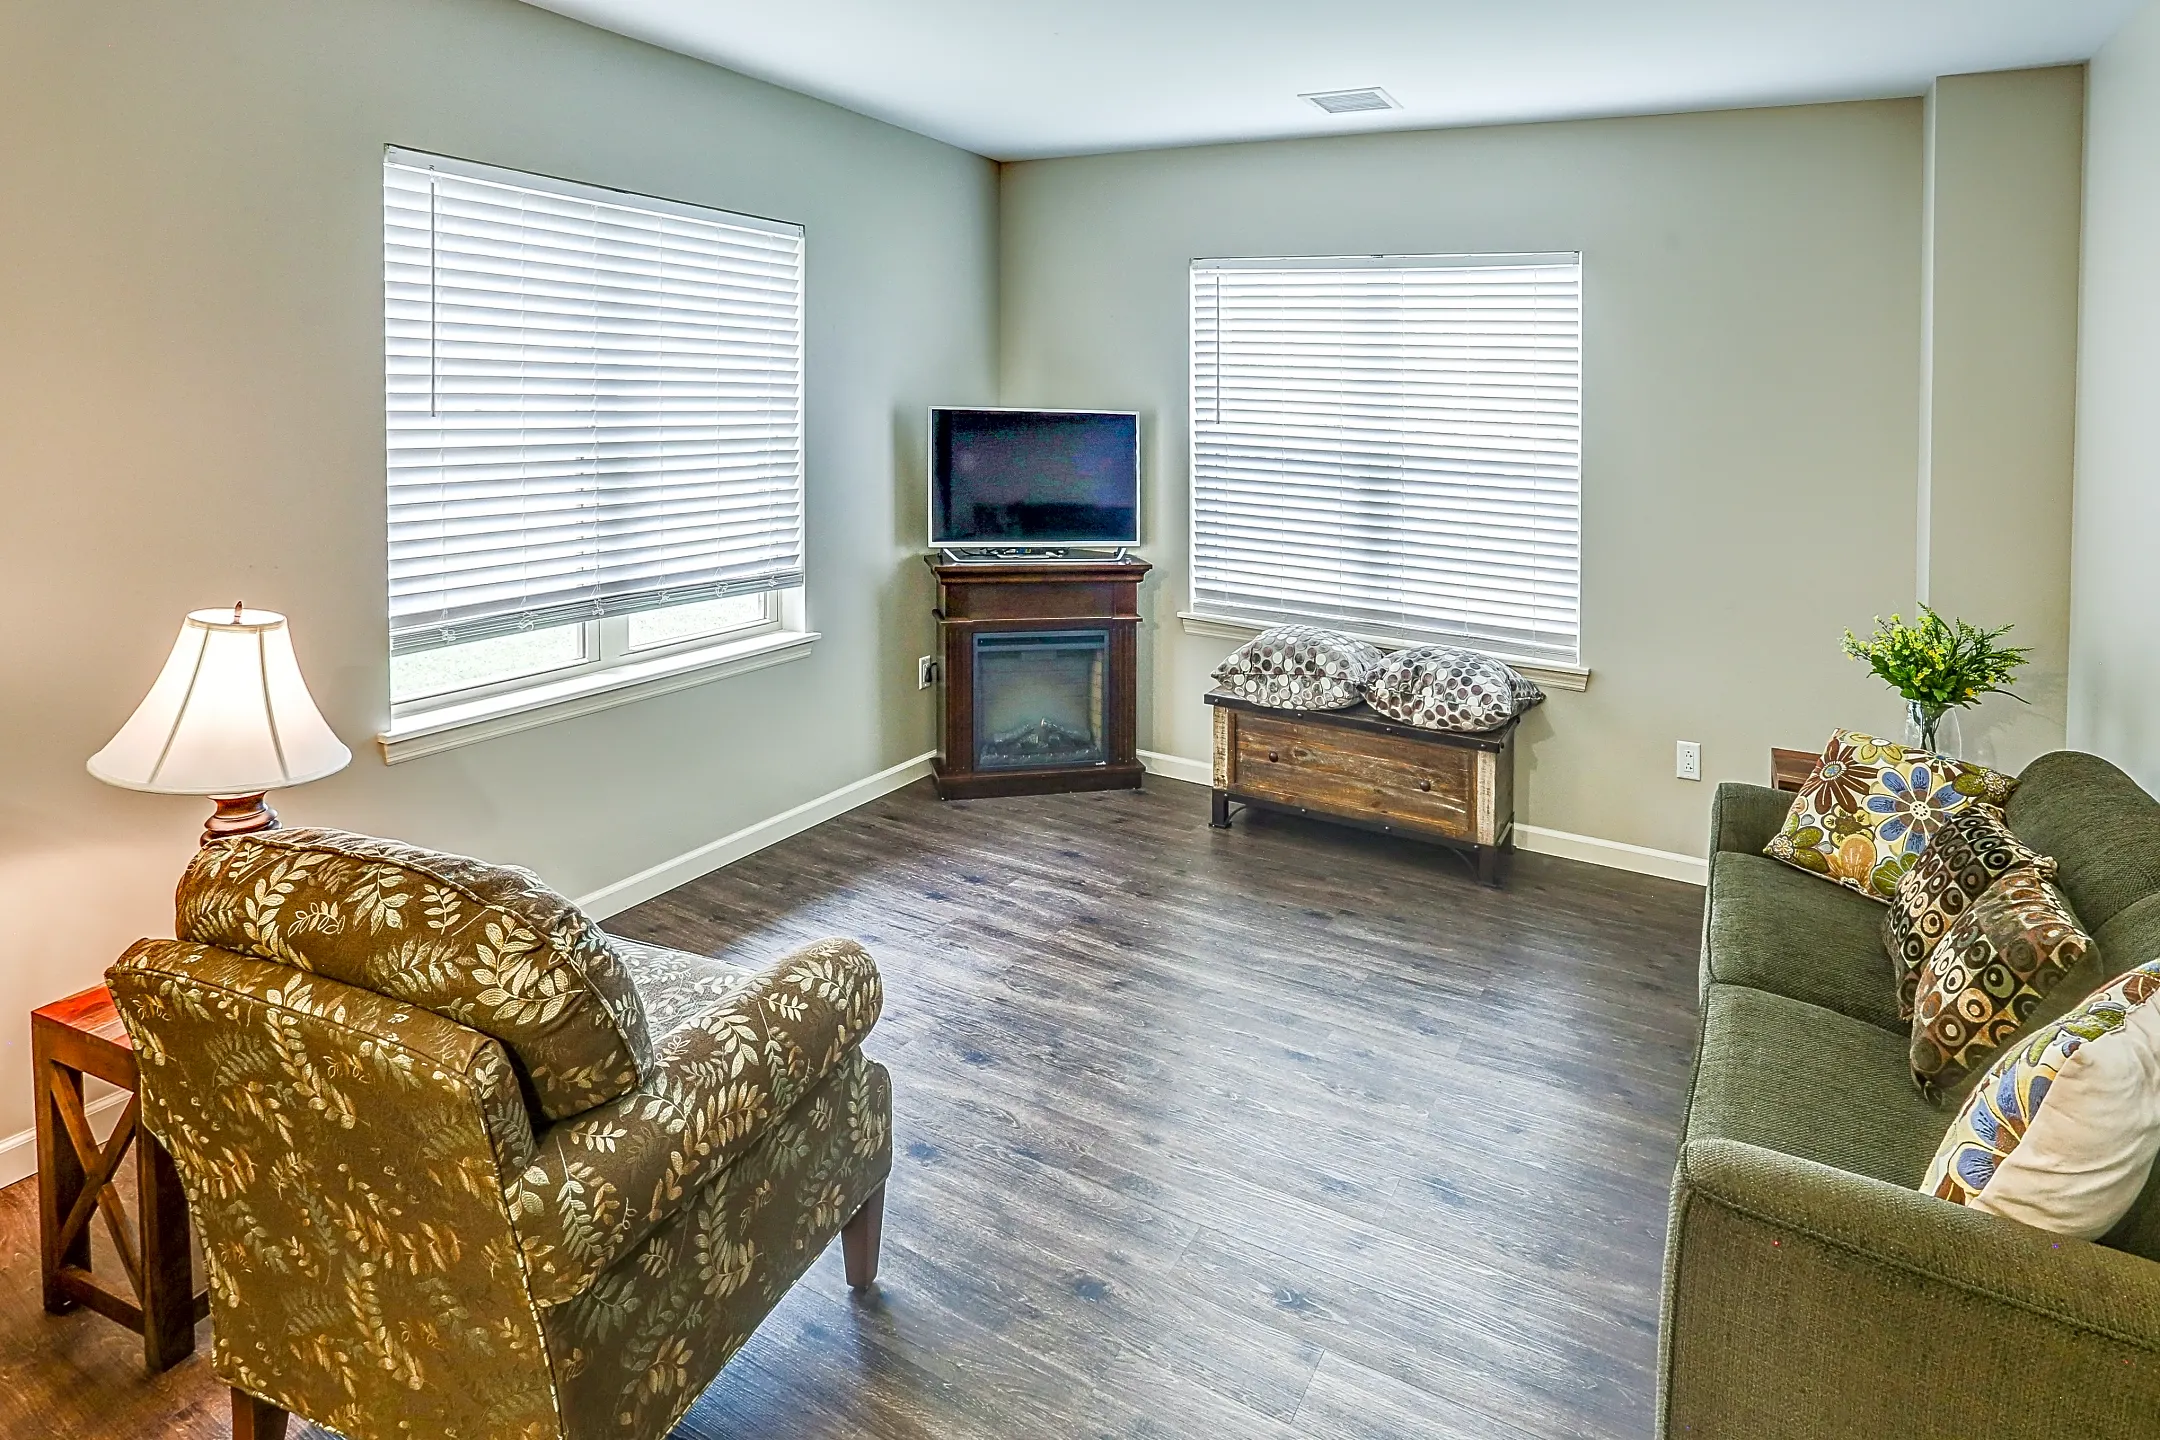 Living Room - Chateau at Heritage Square 55+ Community - Brockport, NY